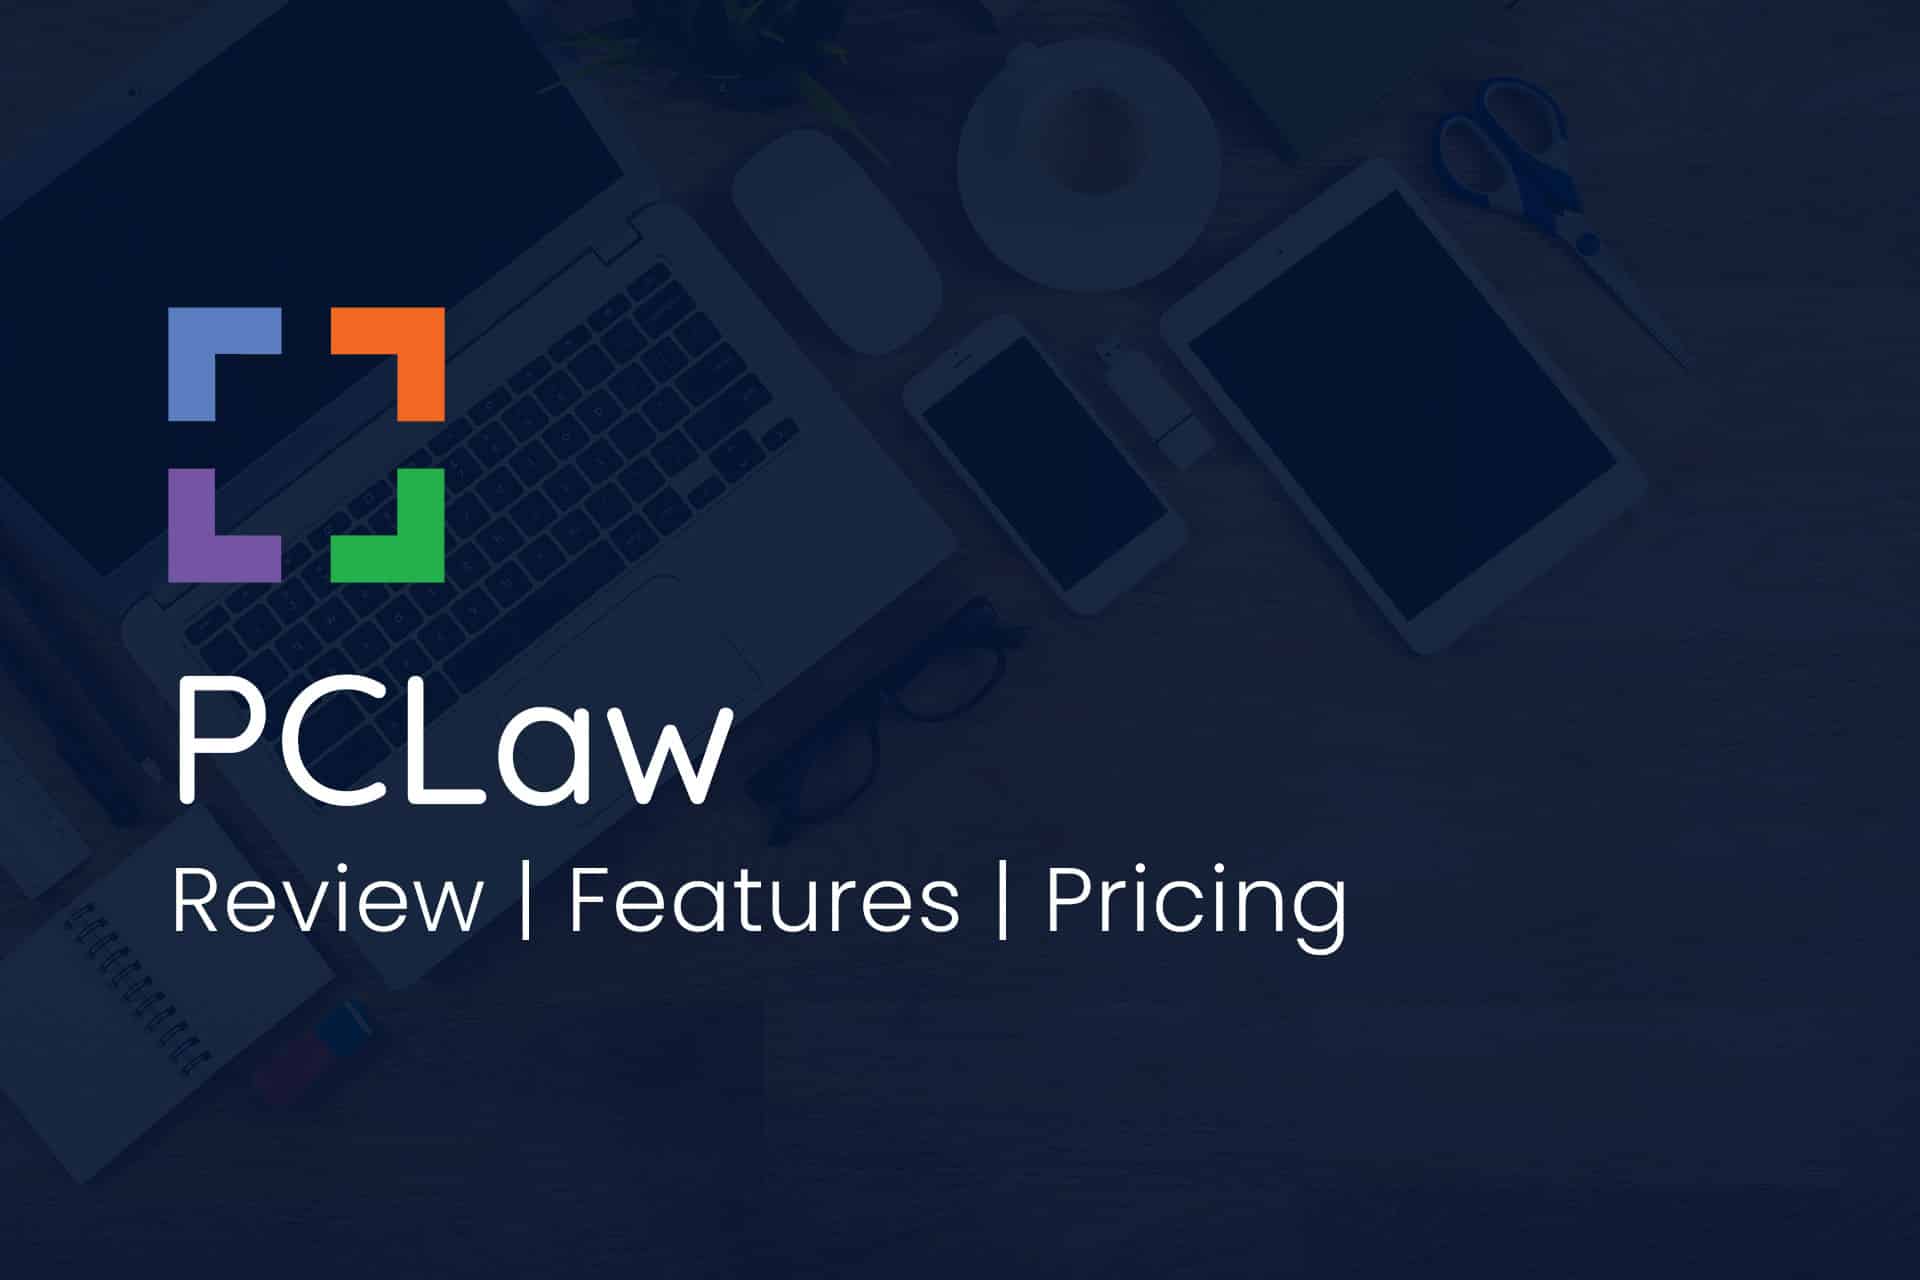 PCLaw: Complete Review, Features, Pricing